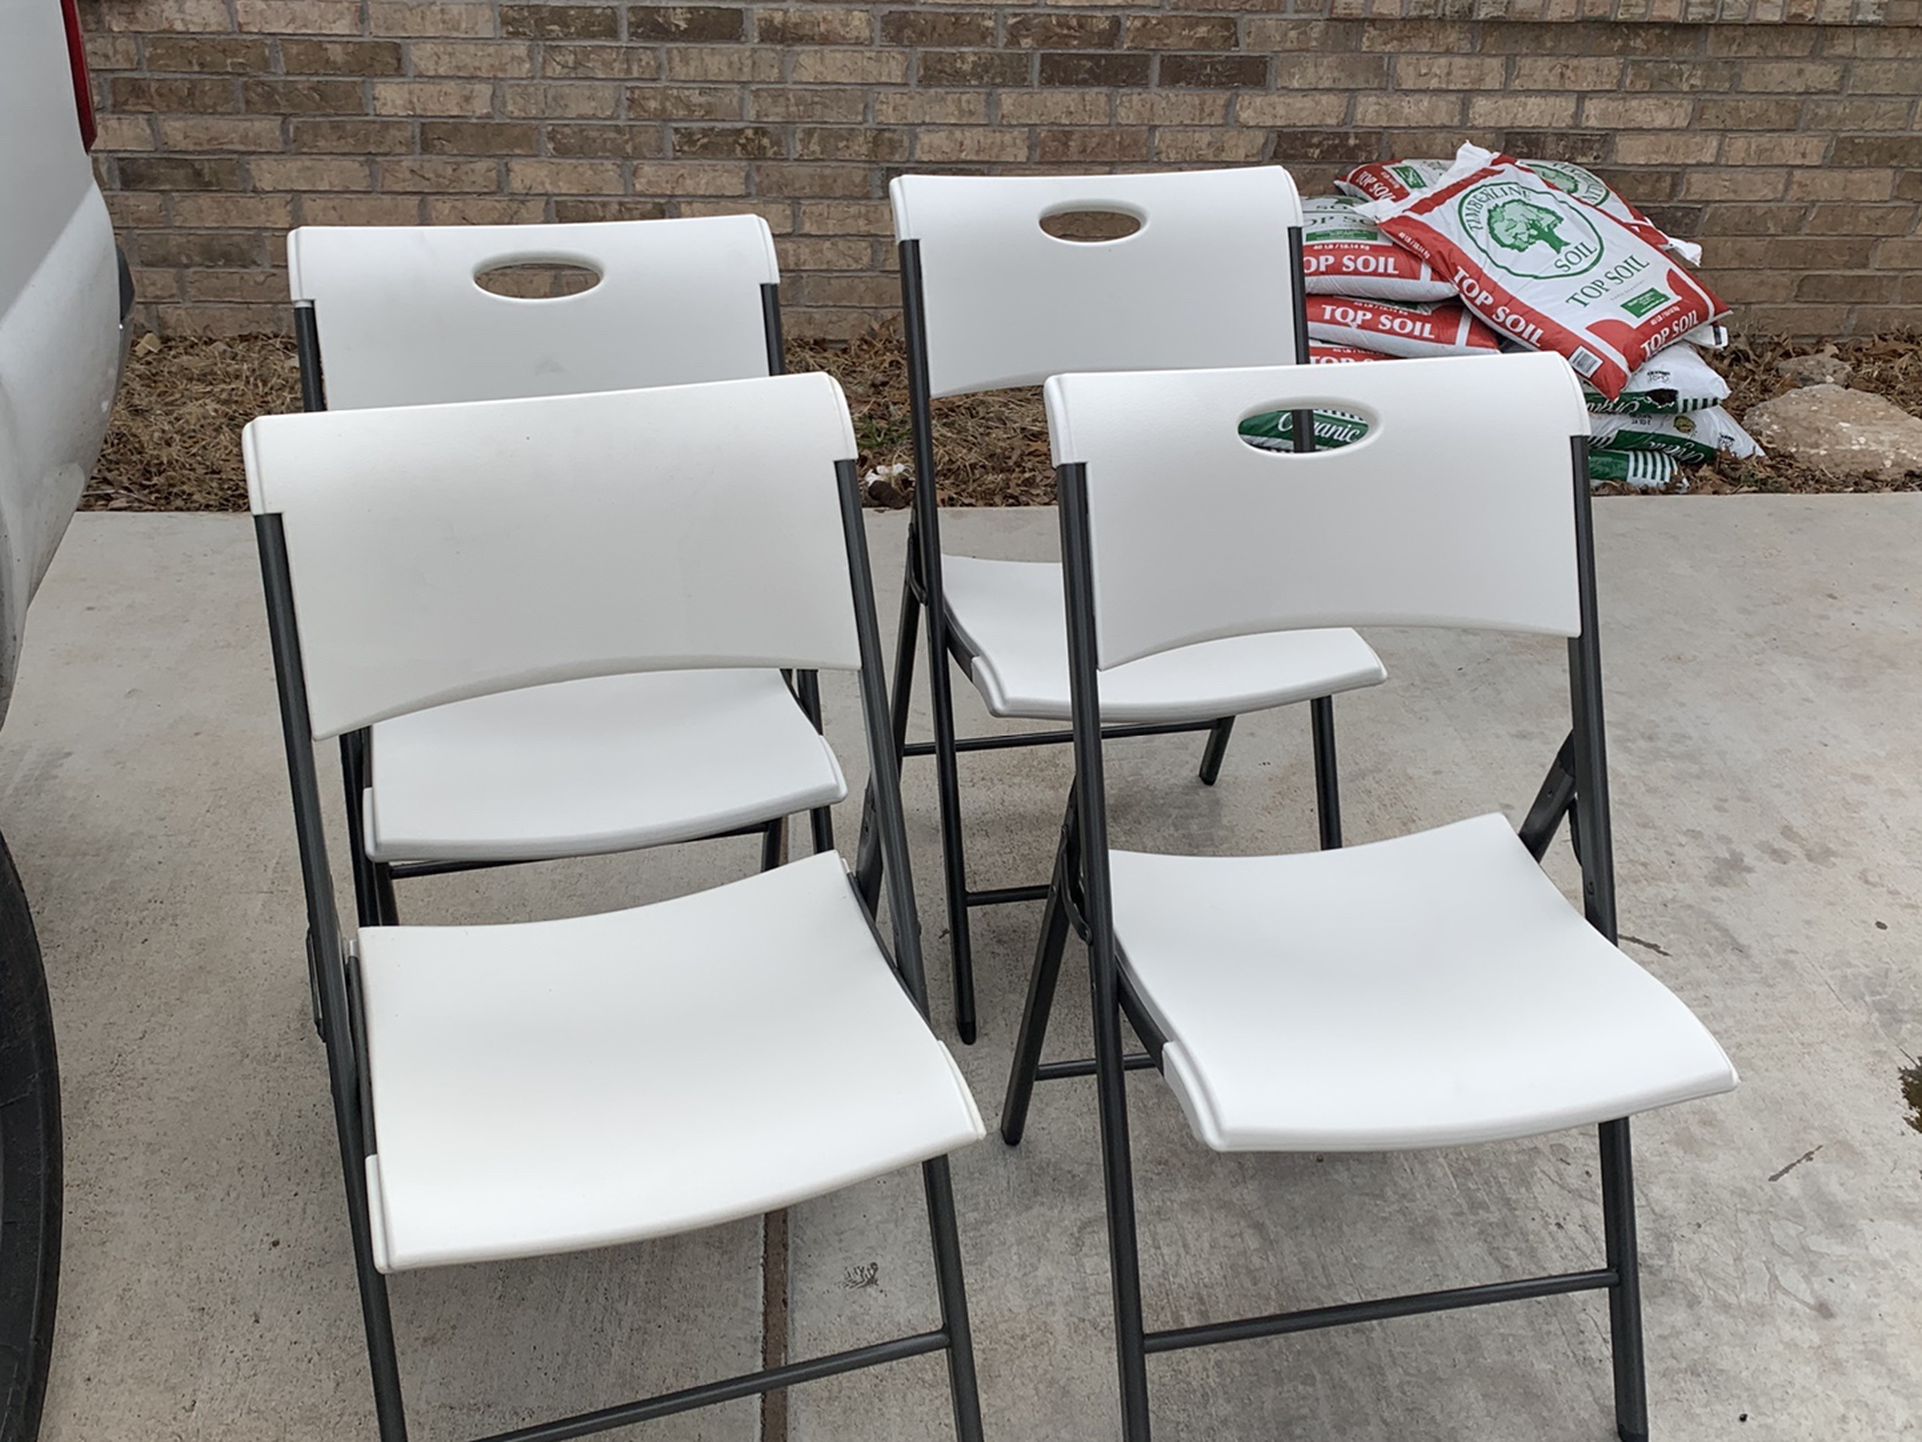 Commercial Grade Folding Chairs (4 Set)